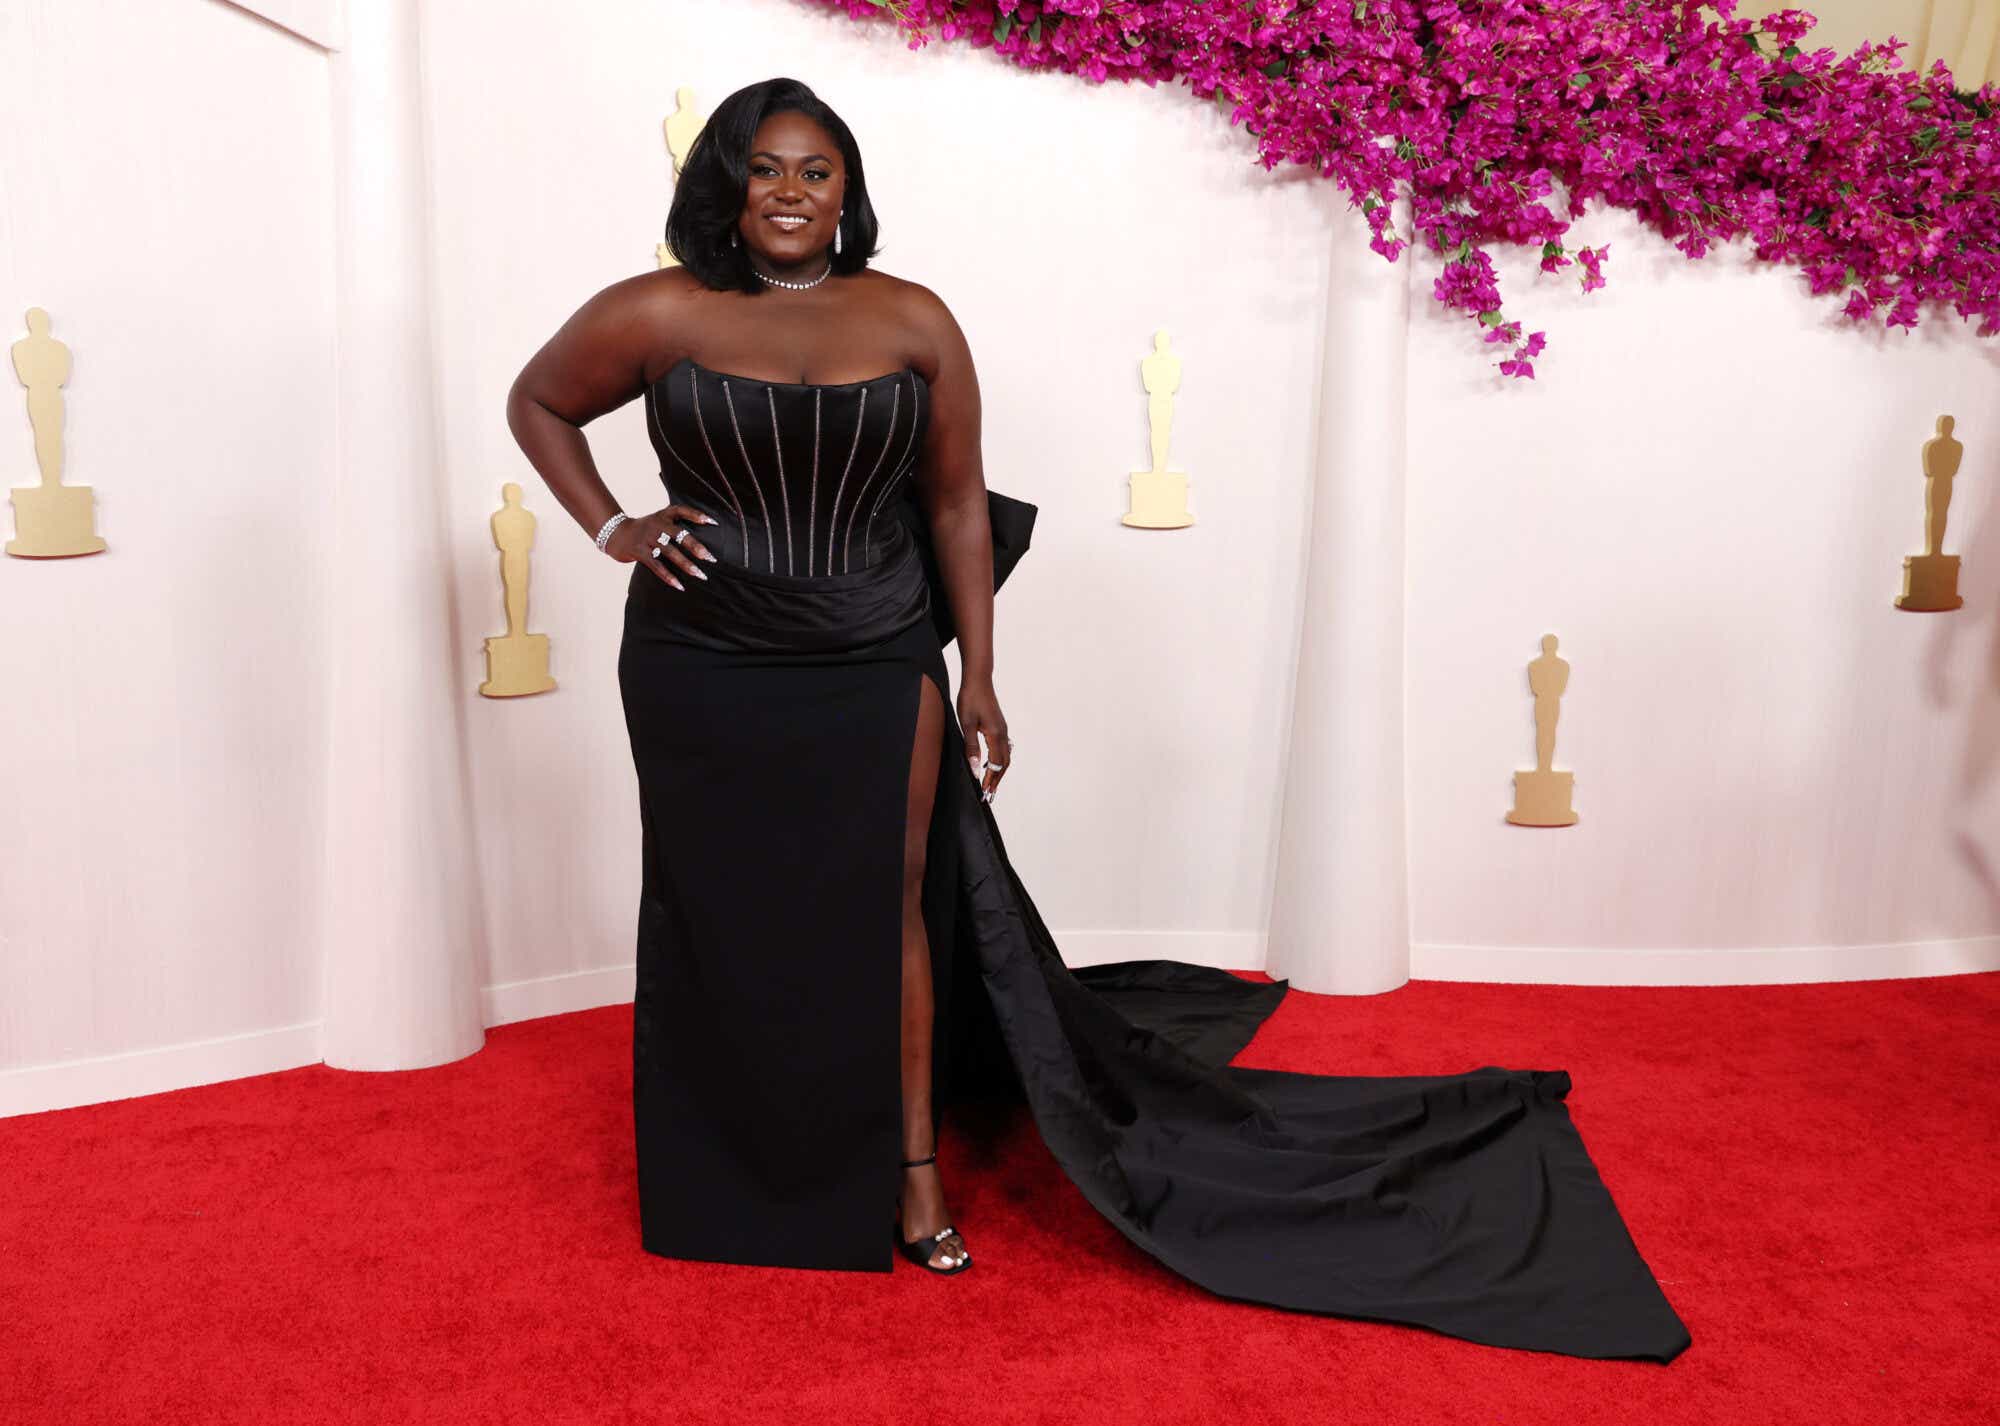 Danielle Brooks arrives at the Oscars wearing a black gown with a beaded corset top, daring leg slit, and a train.